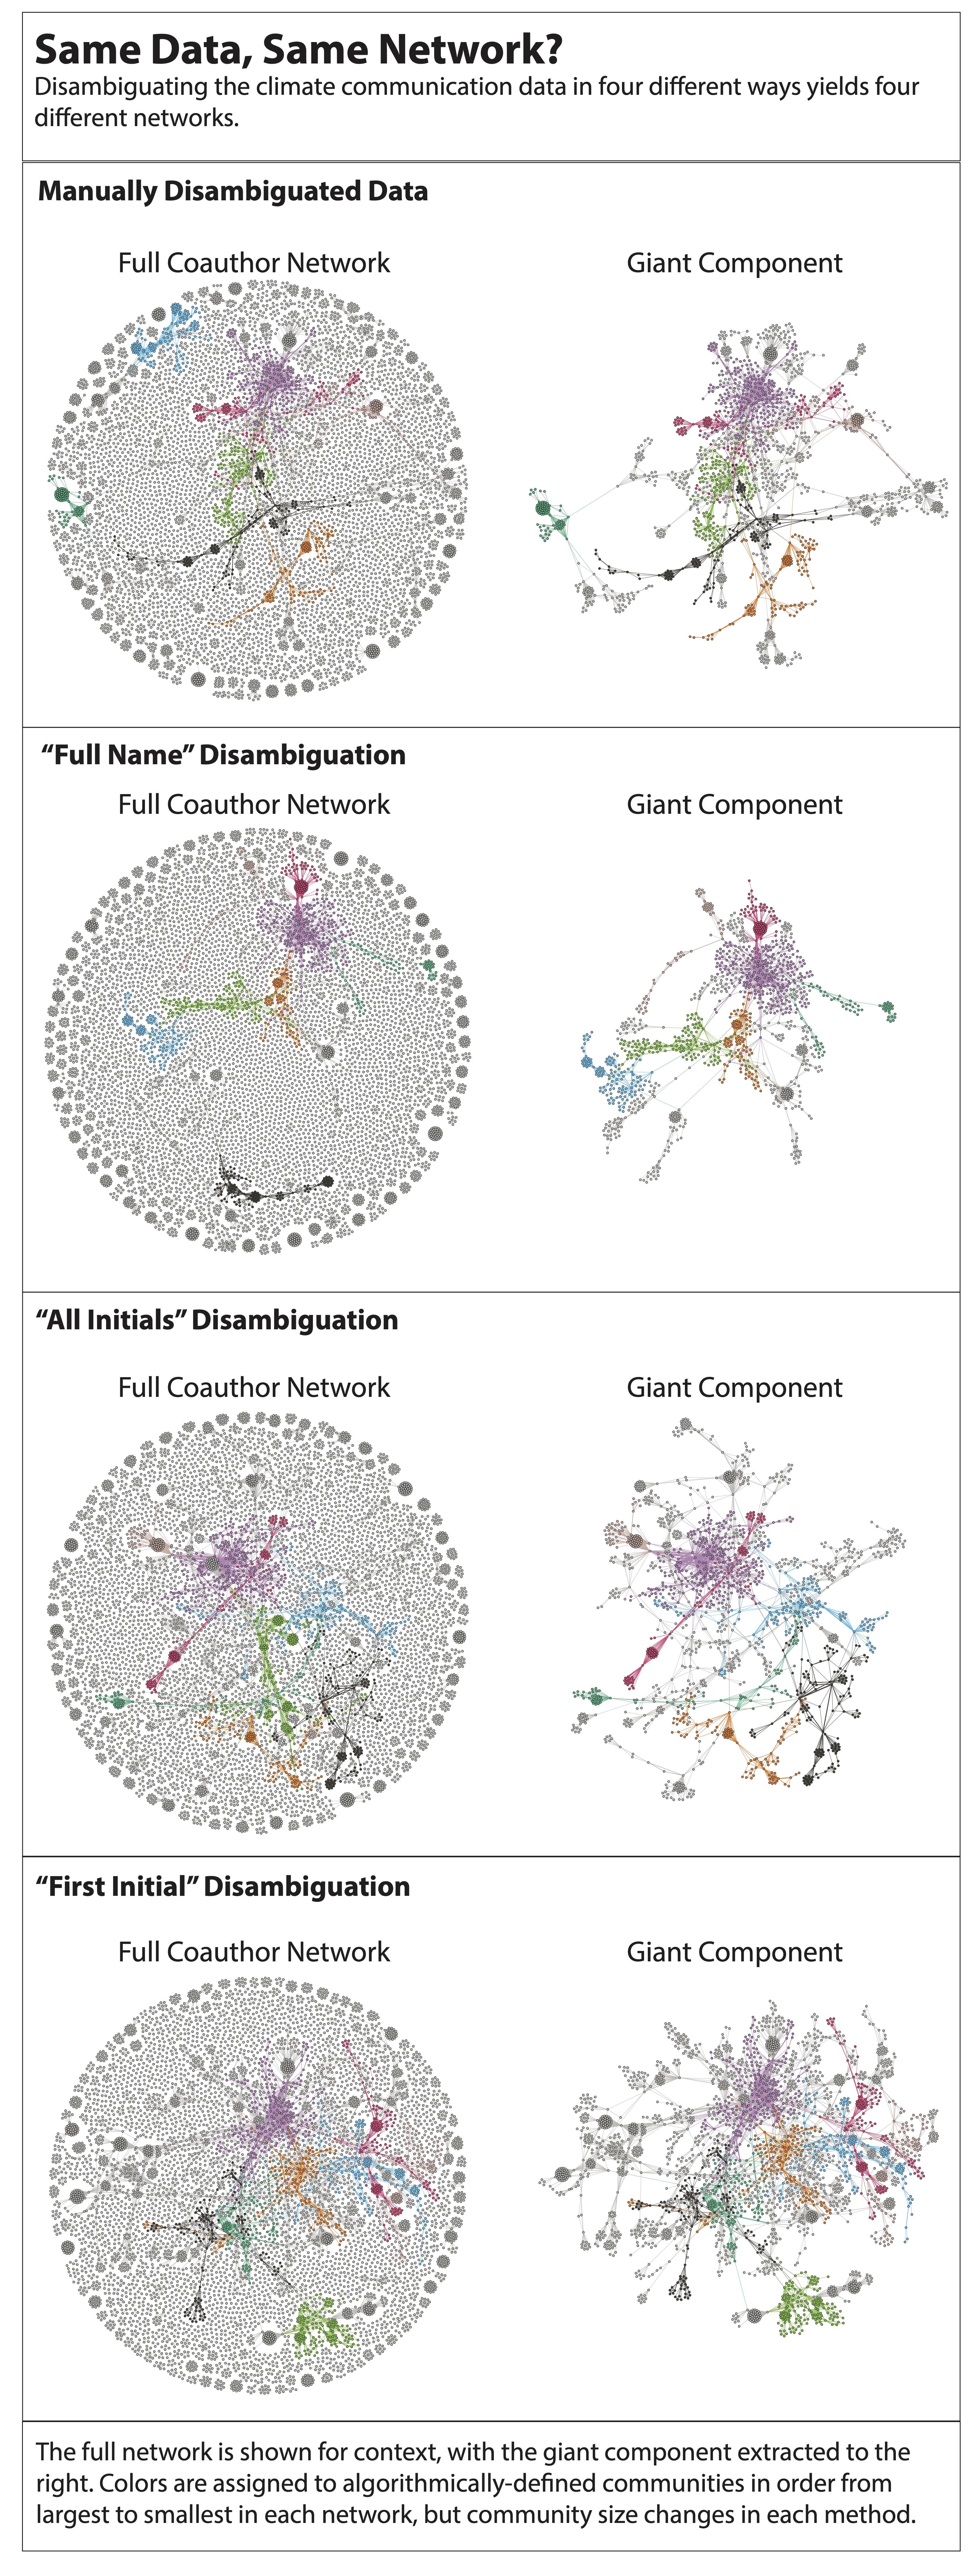 Four examples of disambiguated datasets where each Giant Component is compared
              directly with the full coauthor network. Each example of the full network is a
              circular arrangement of uncoupled light gray nodes with the brightly colored giant
              component laid overtop. Each example of the disambiguated data shows only the linked
              nodes.